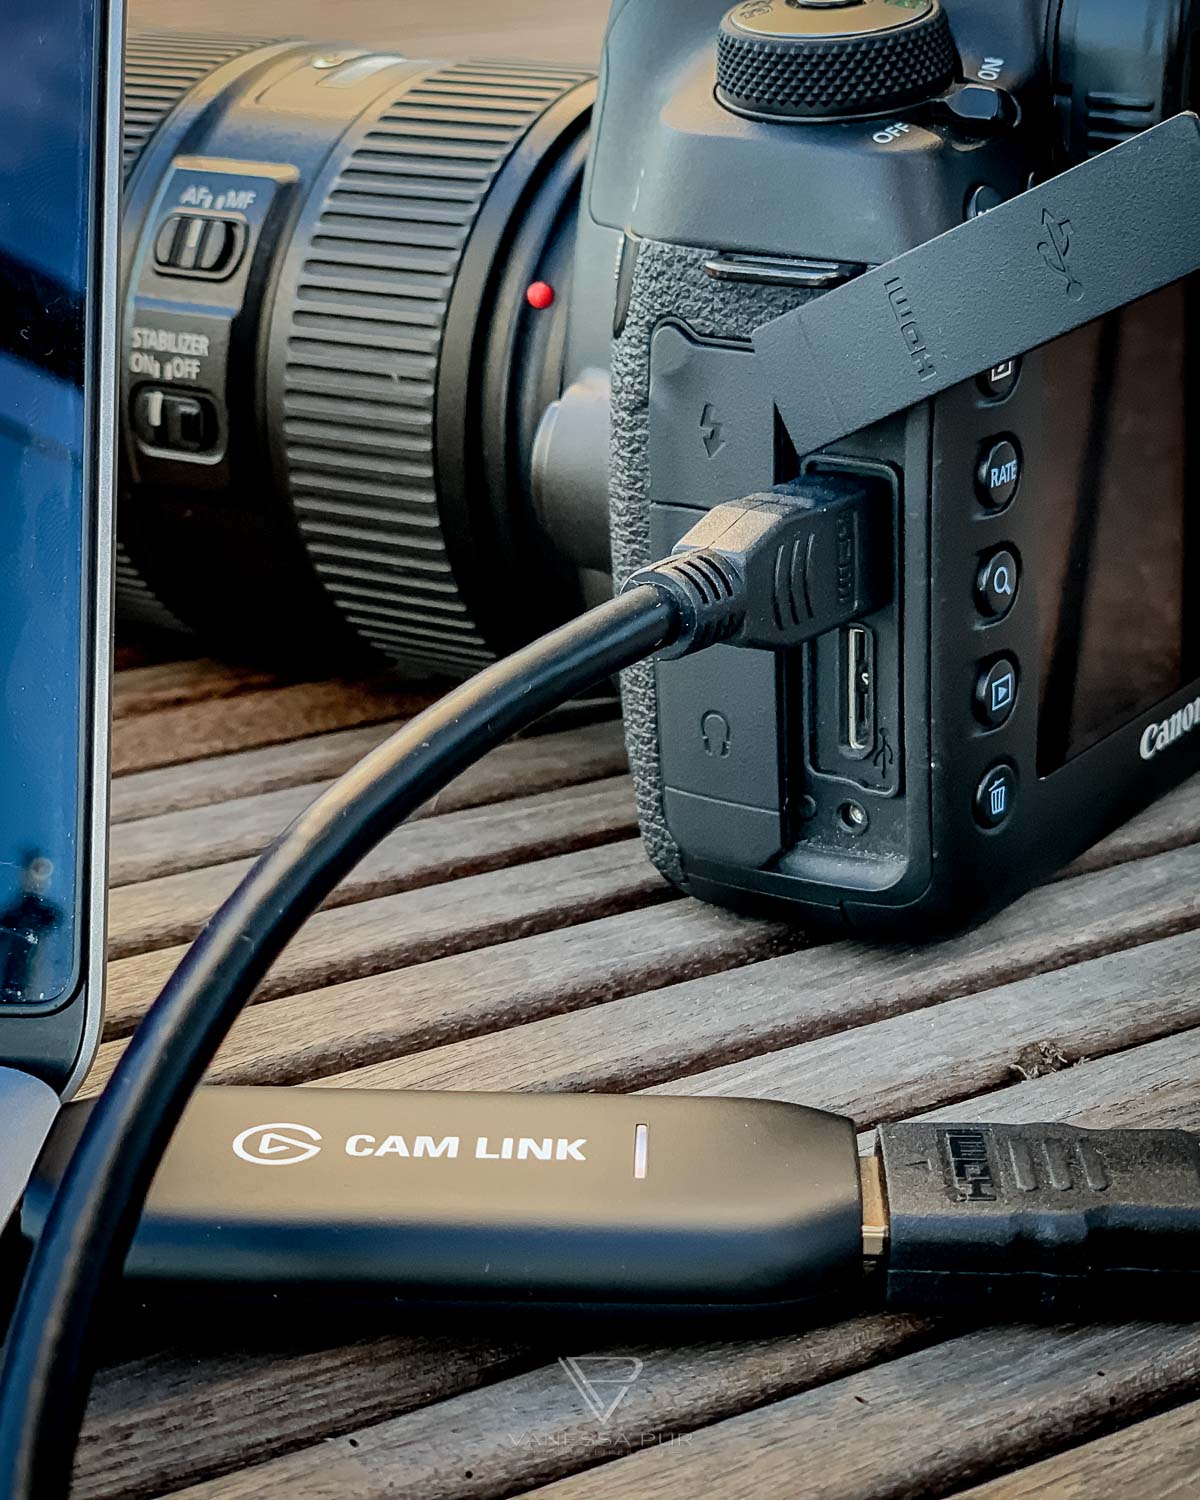 Elgato Cam Link - connect camera to laptop or PC for streaming, gaming - Elgato Cam Link USB Stick - Streaming solution for Twitch and YouTube with DSLR camera - video streaming made easy - Review